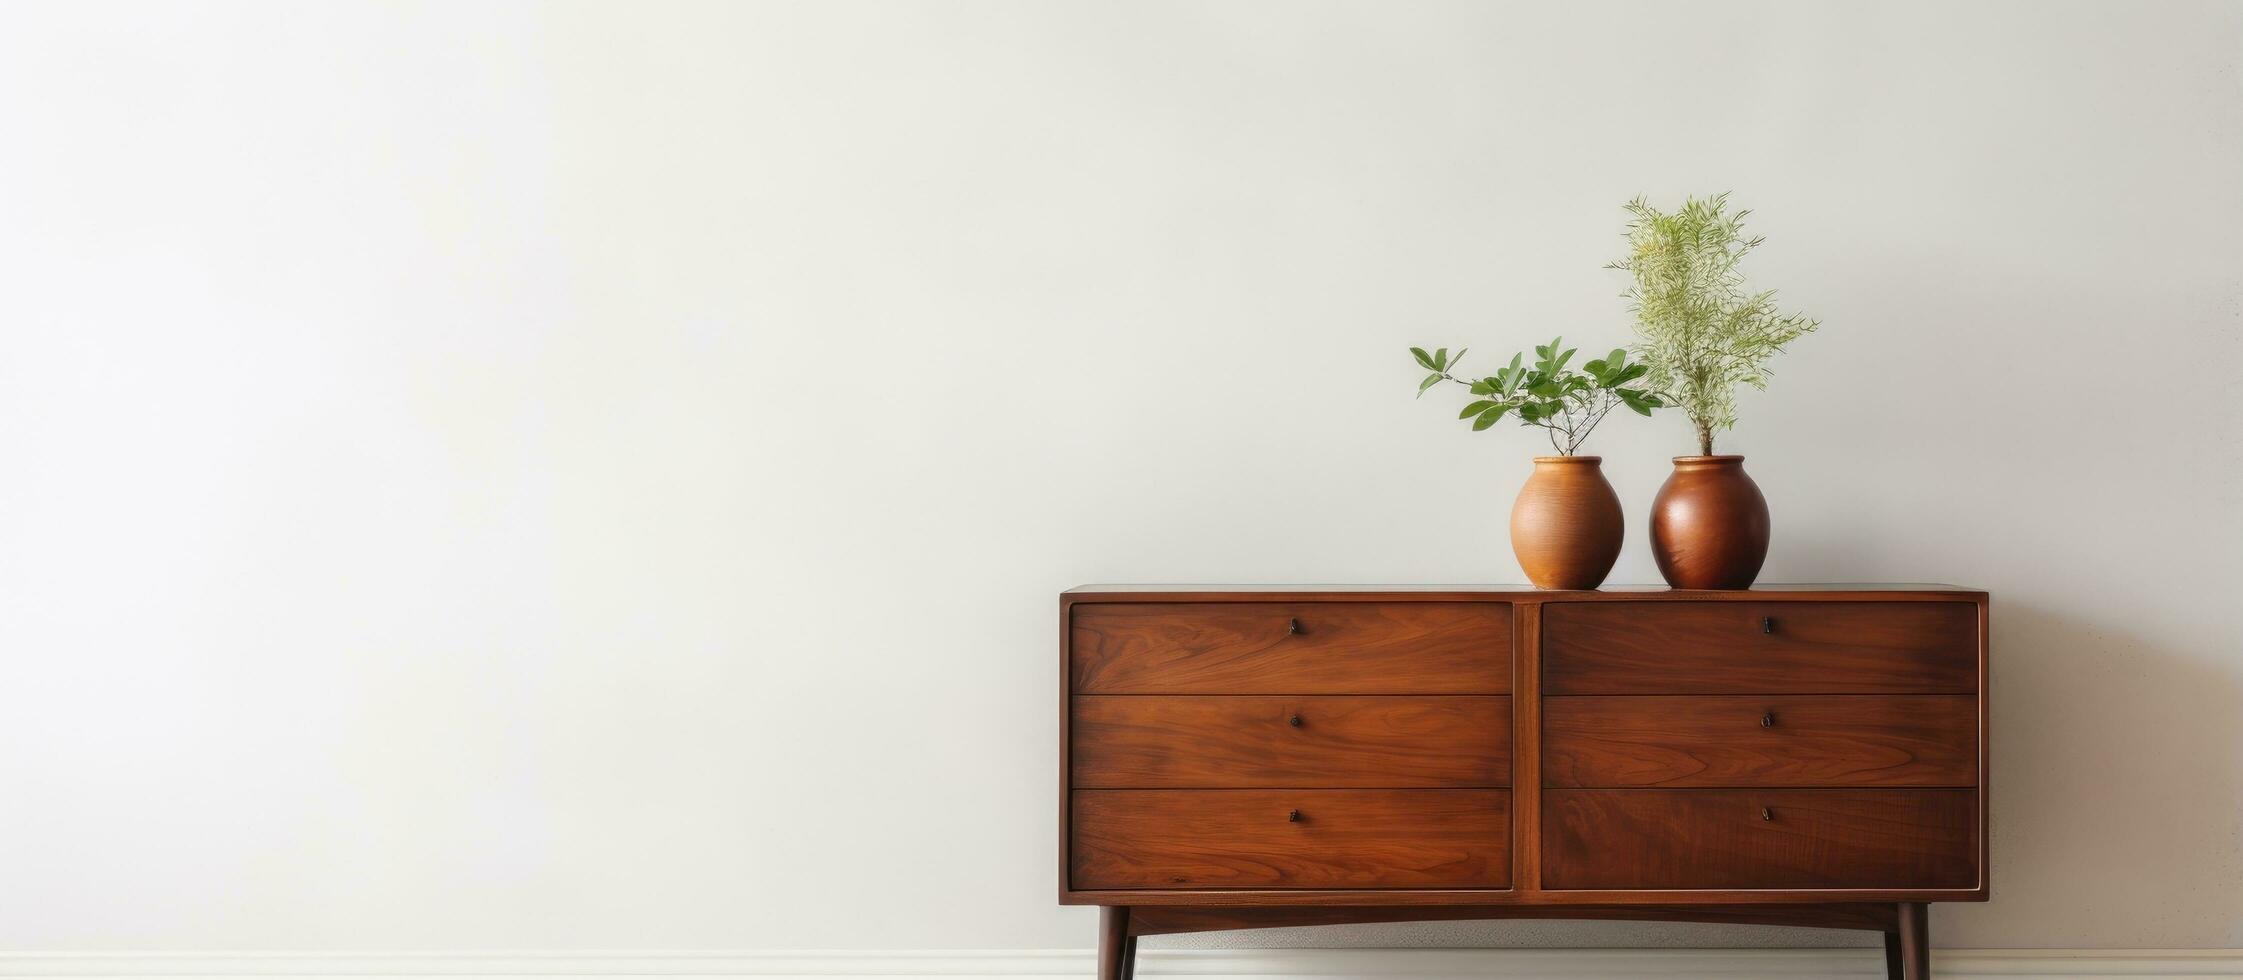 Wooden dresser by white wall inside photo